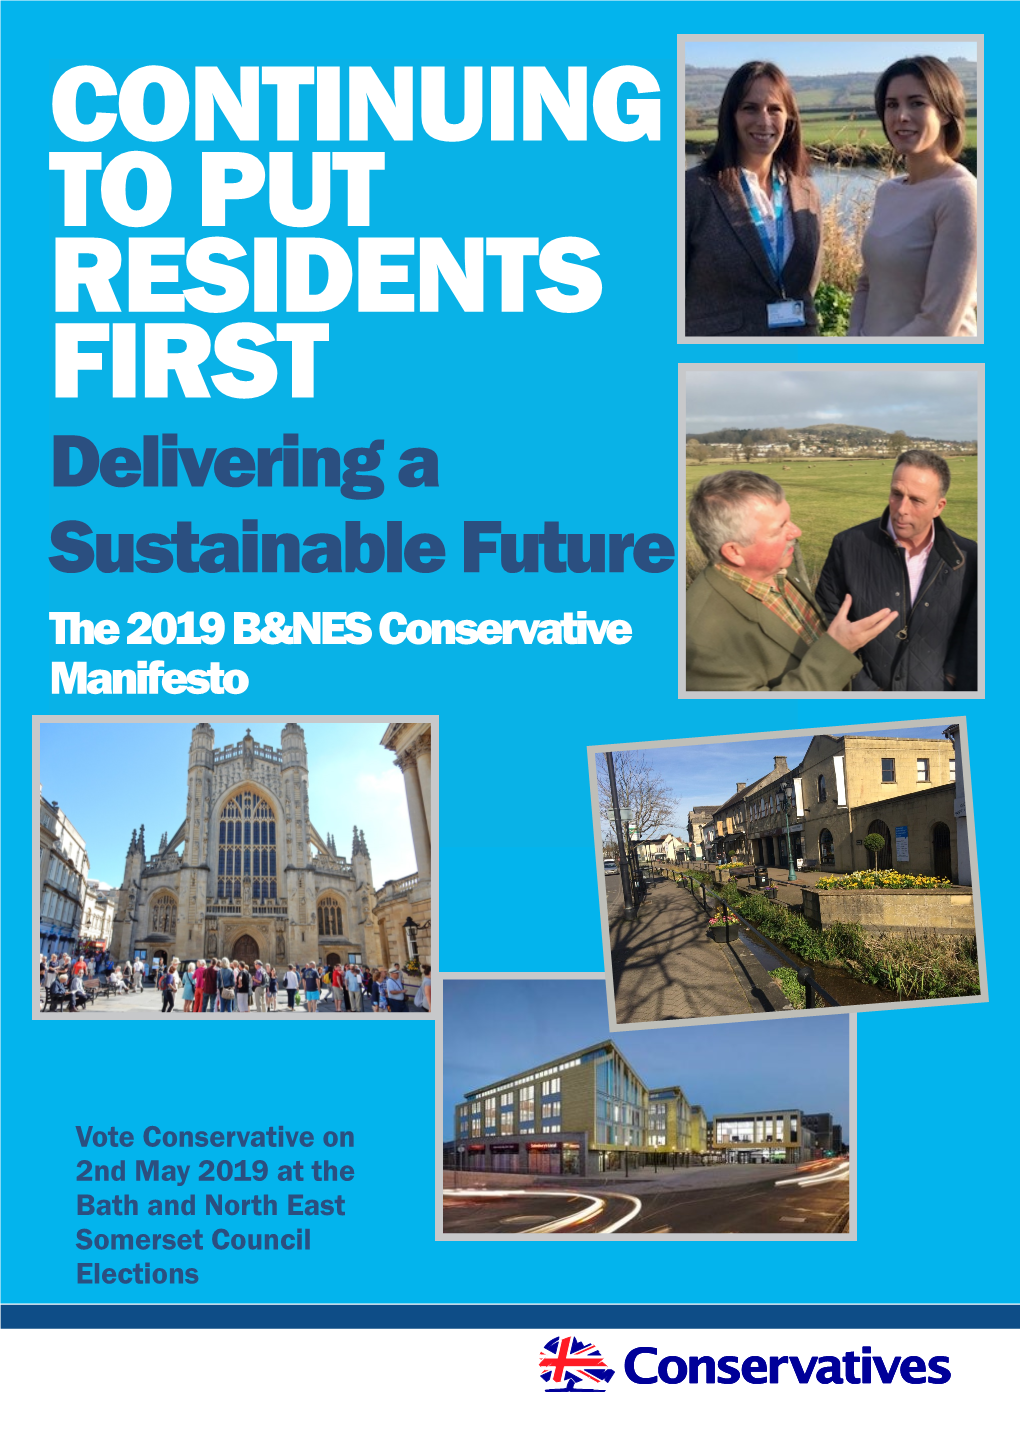 CONTINUING to PUT RESIDENTS FIRST Delivering a Sustainable Future the 2019 B&NES Conservative Manifesto